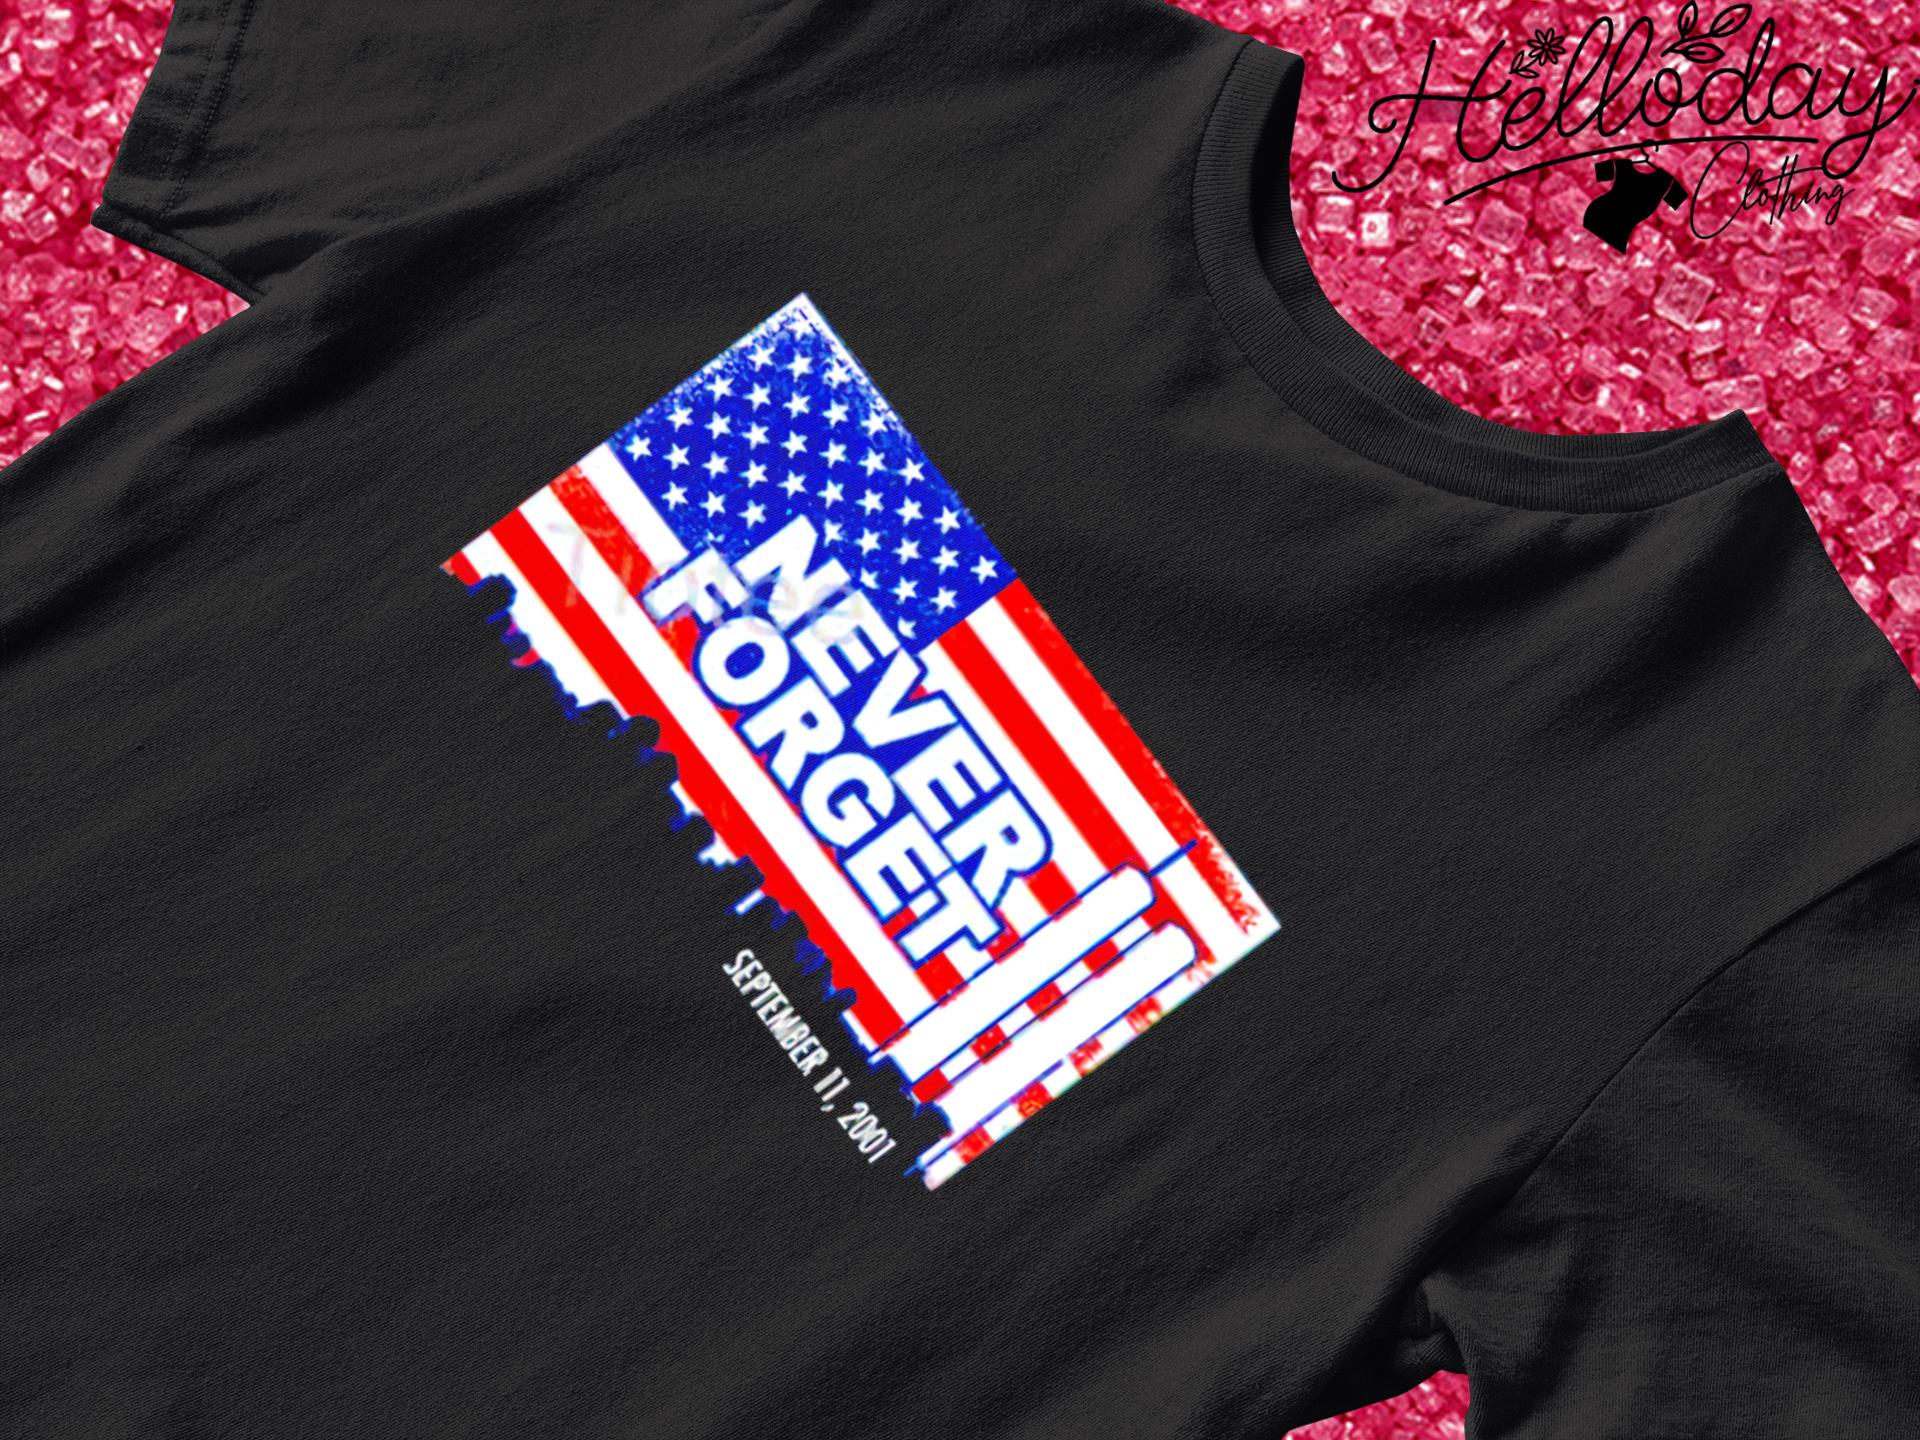 Never forget flag T-shirt